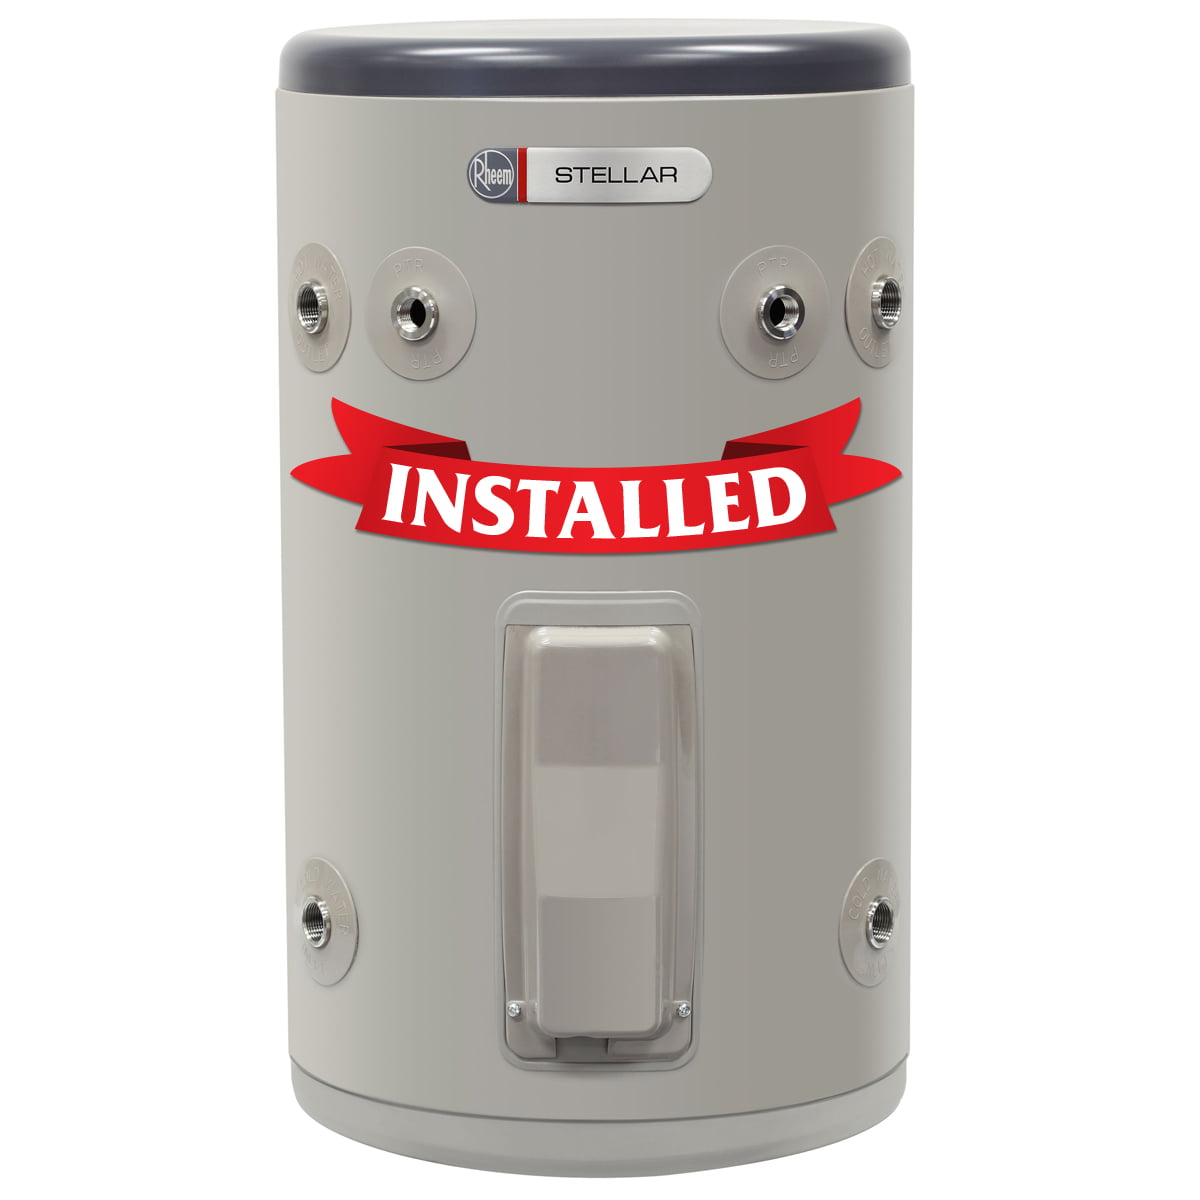 rheem-stellar-50-litre-electric-stainless-steel-hot-water-system-price